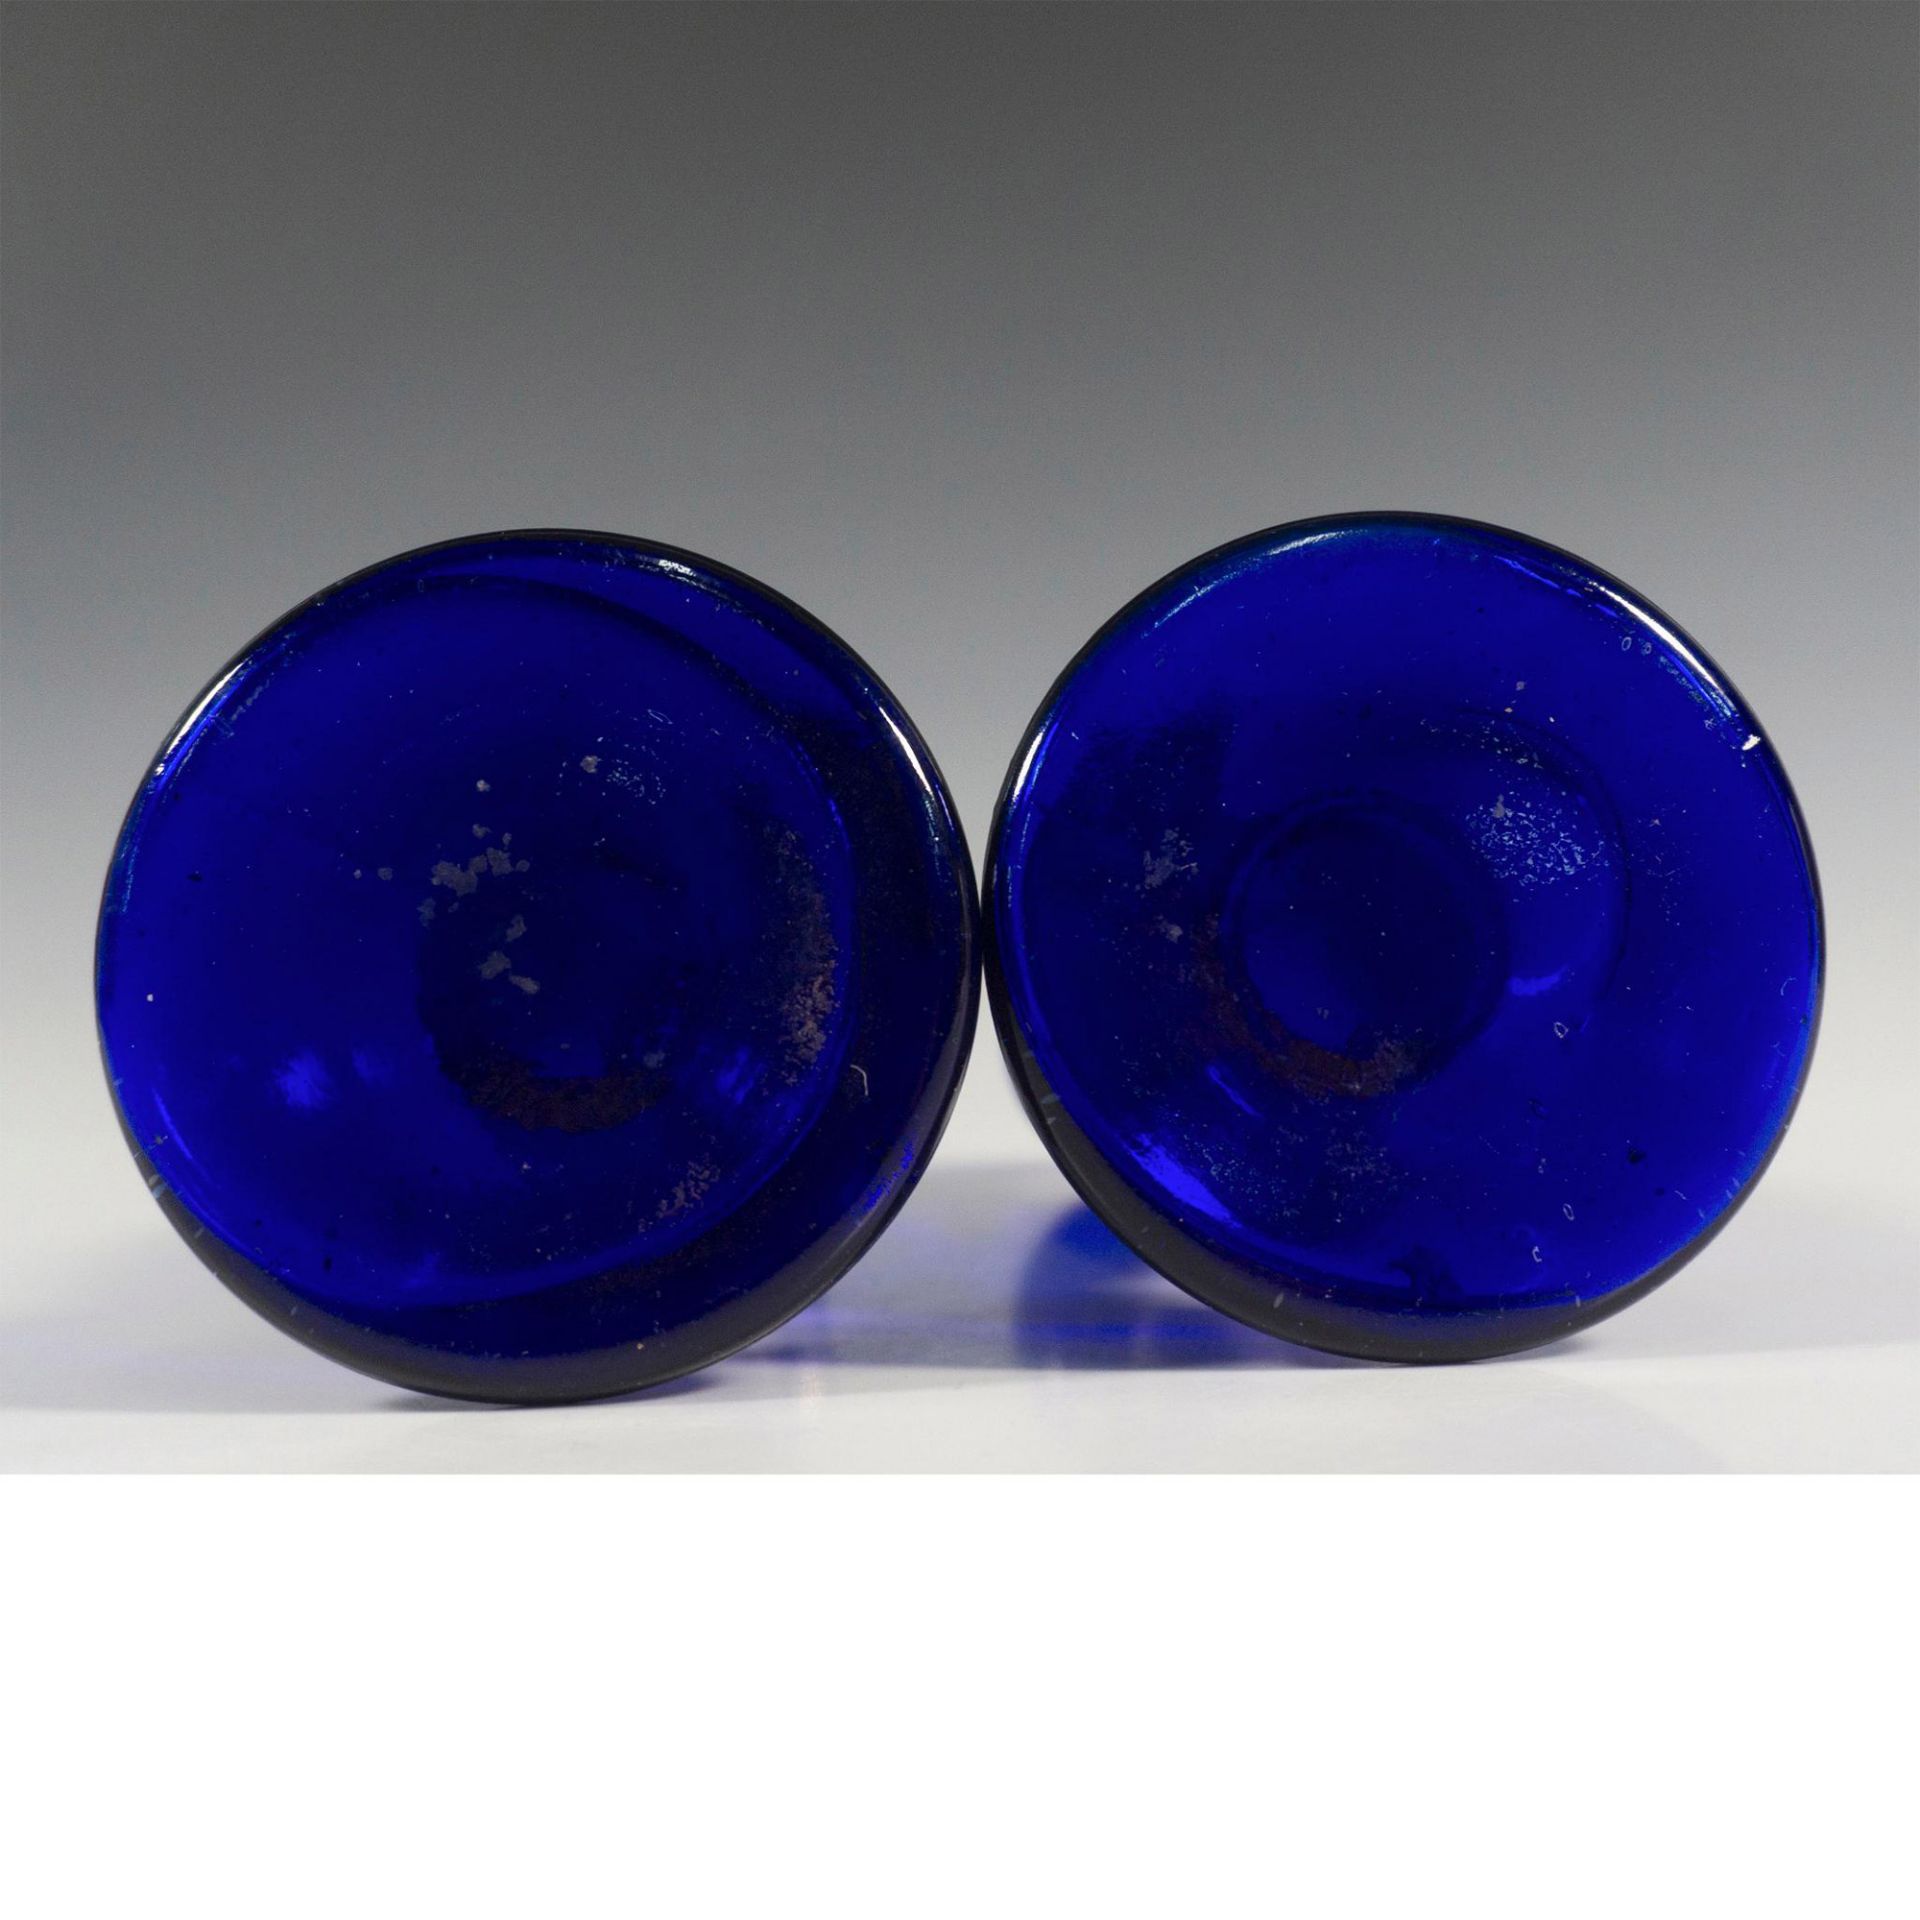 Pair of Vintage Art Glass Blue Candle Holders - Image 4 of 5